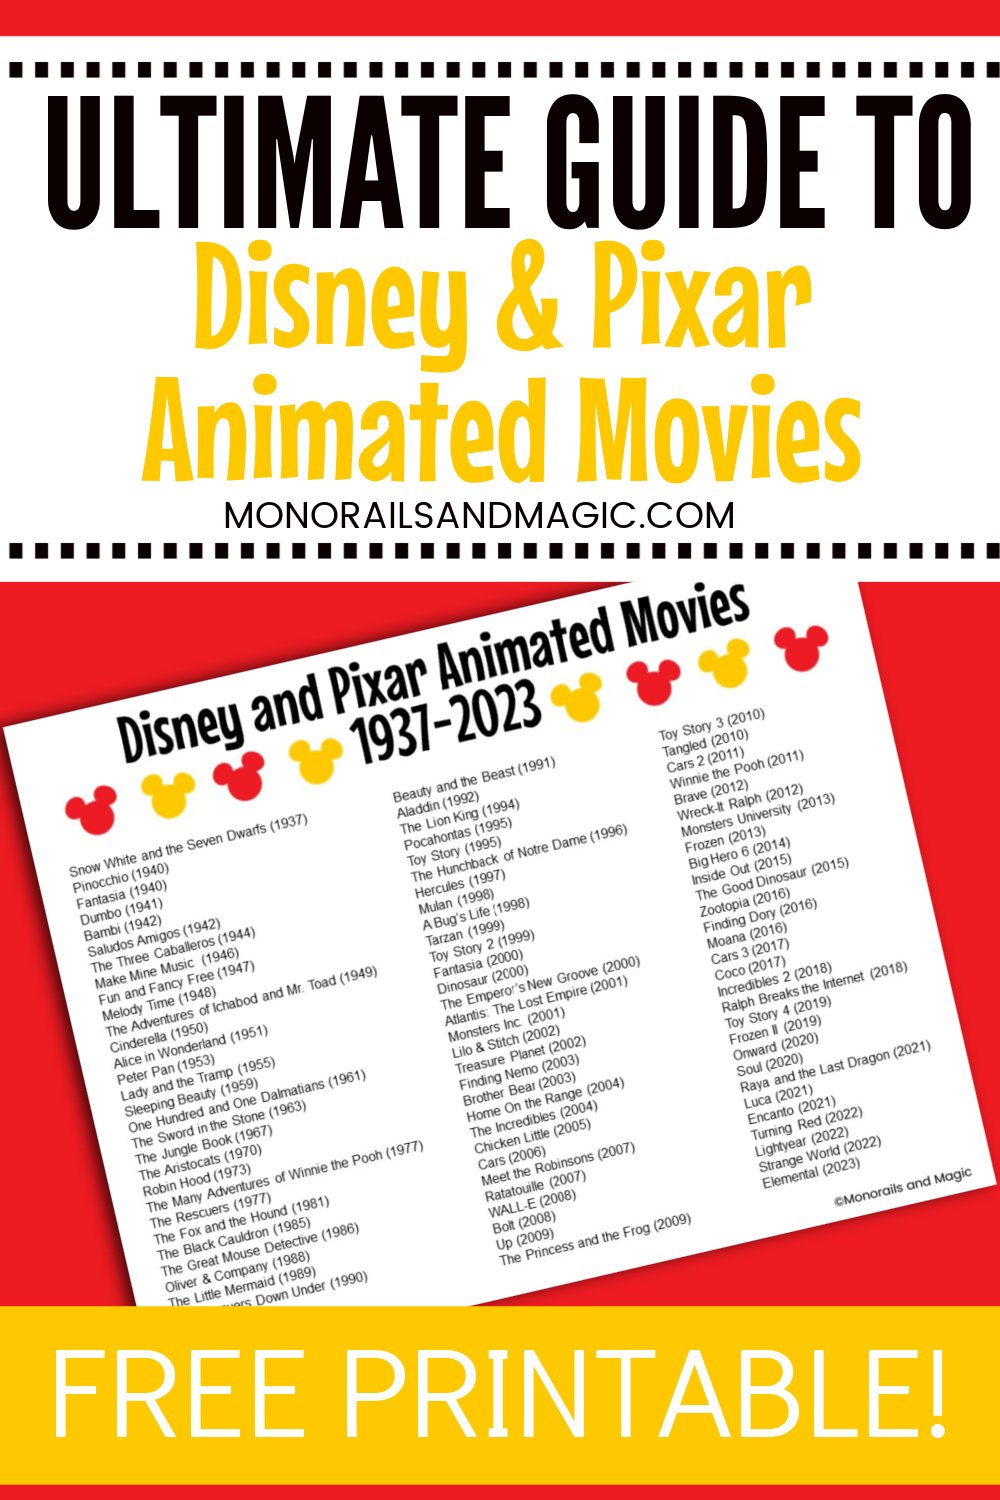 Printable list of Disney and Pixar animated movies from 1937 to 2019